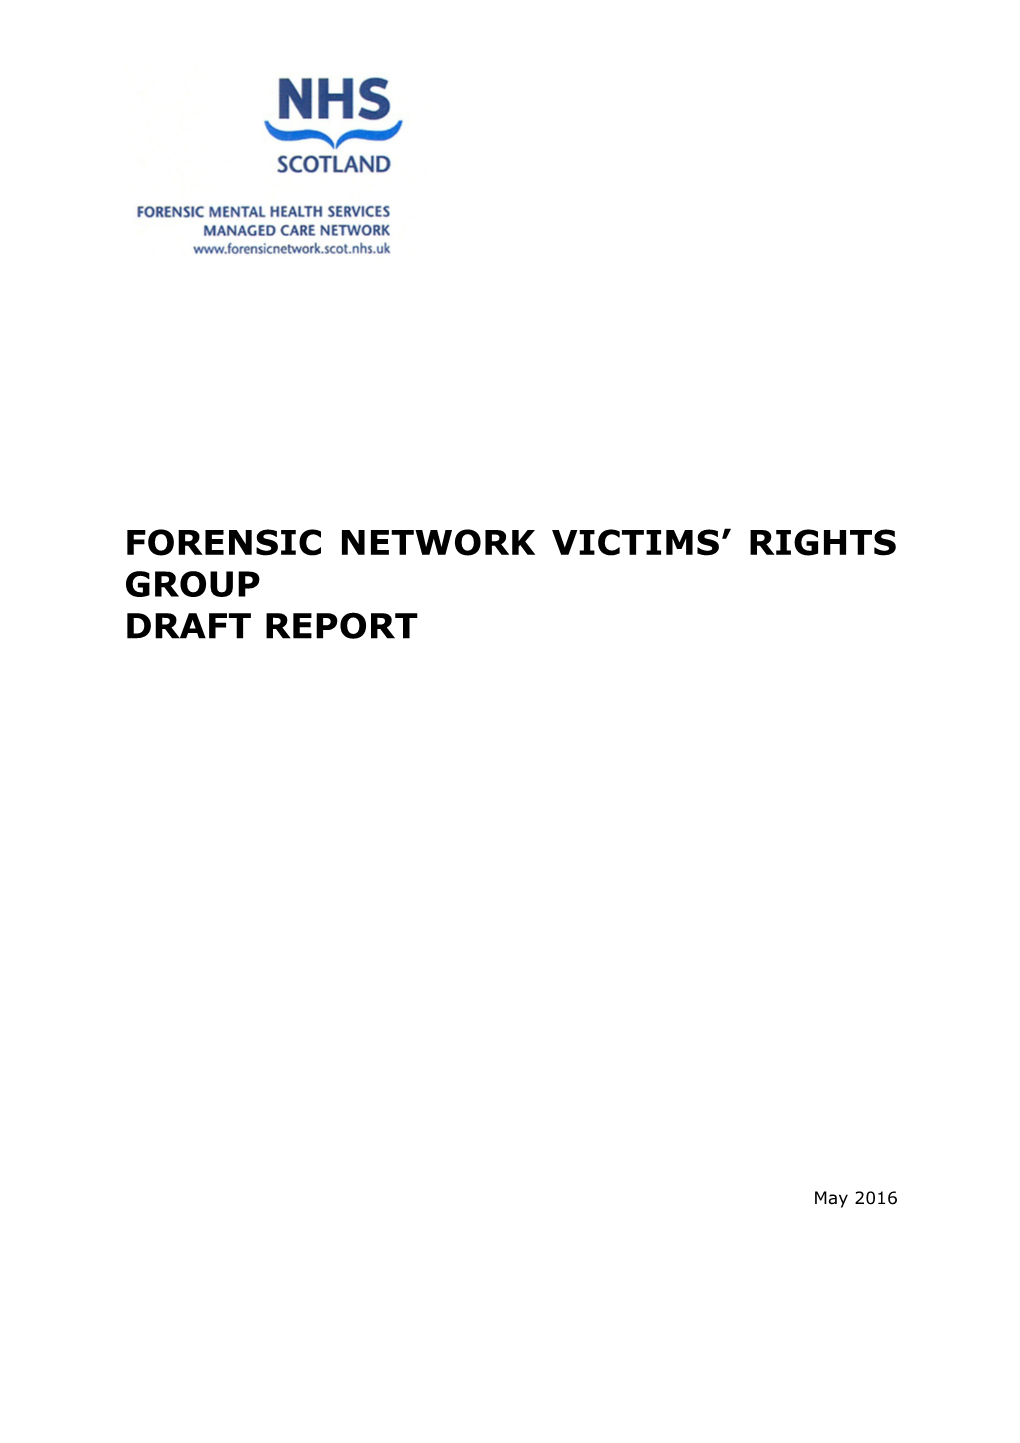 Forensic Network Victims Rights Group